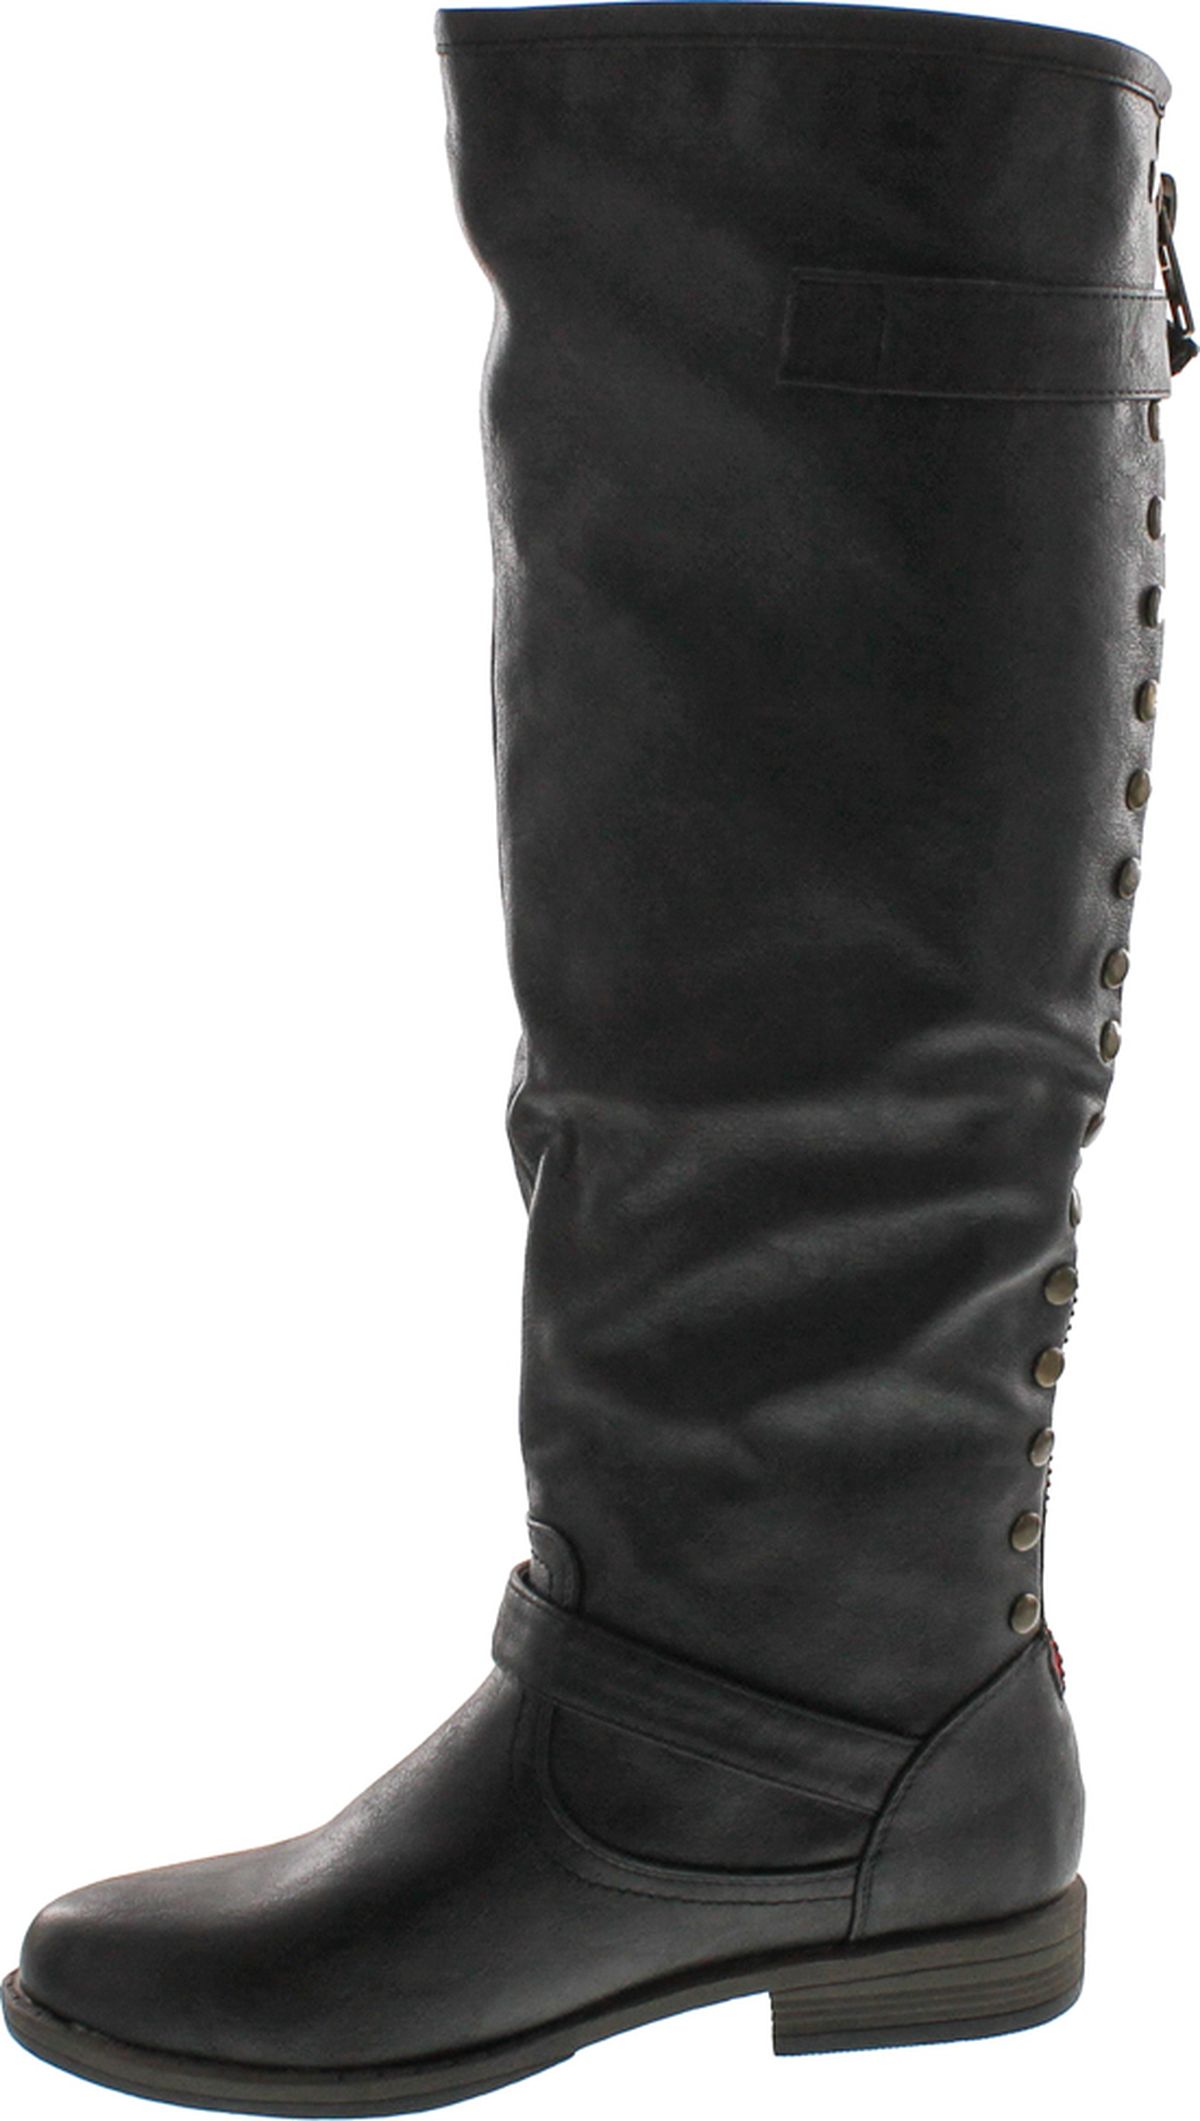 Bamboo Women's Montage 83 Riding Boots with Zipper, Black, 6 - image 2 of 4